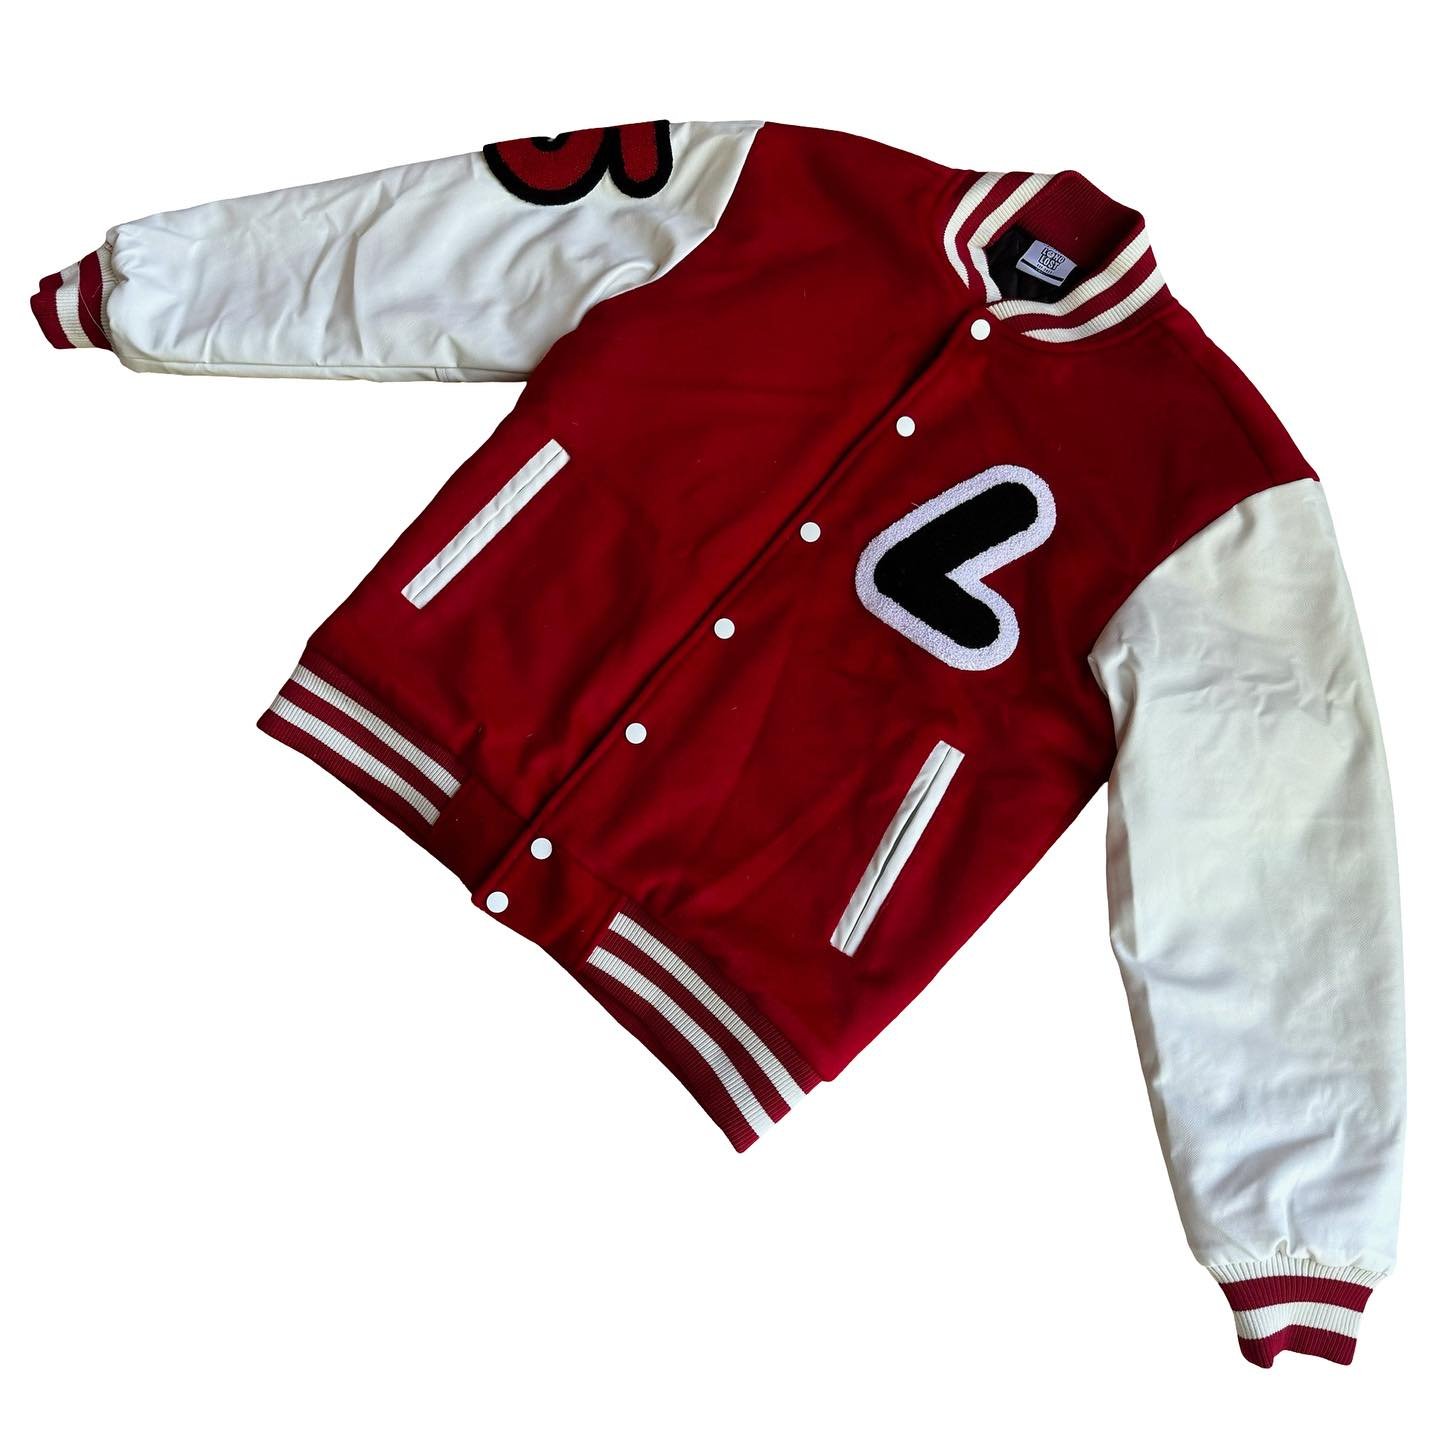 Fully custom varsity jackets for @longlostnft 
- 100% wool red body
- Genuine leather sleeves
- Ribbed knit waist and sleeve cuffs
- Sewn in chenille appliqu&eacute;
- Quilted inside body
- Leather rimmed pockets

#cutandsewn #manufacturing #screenpr